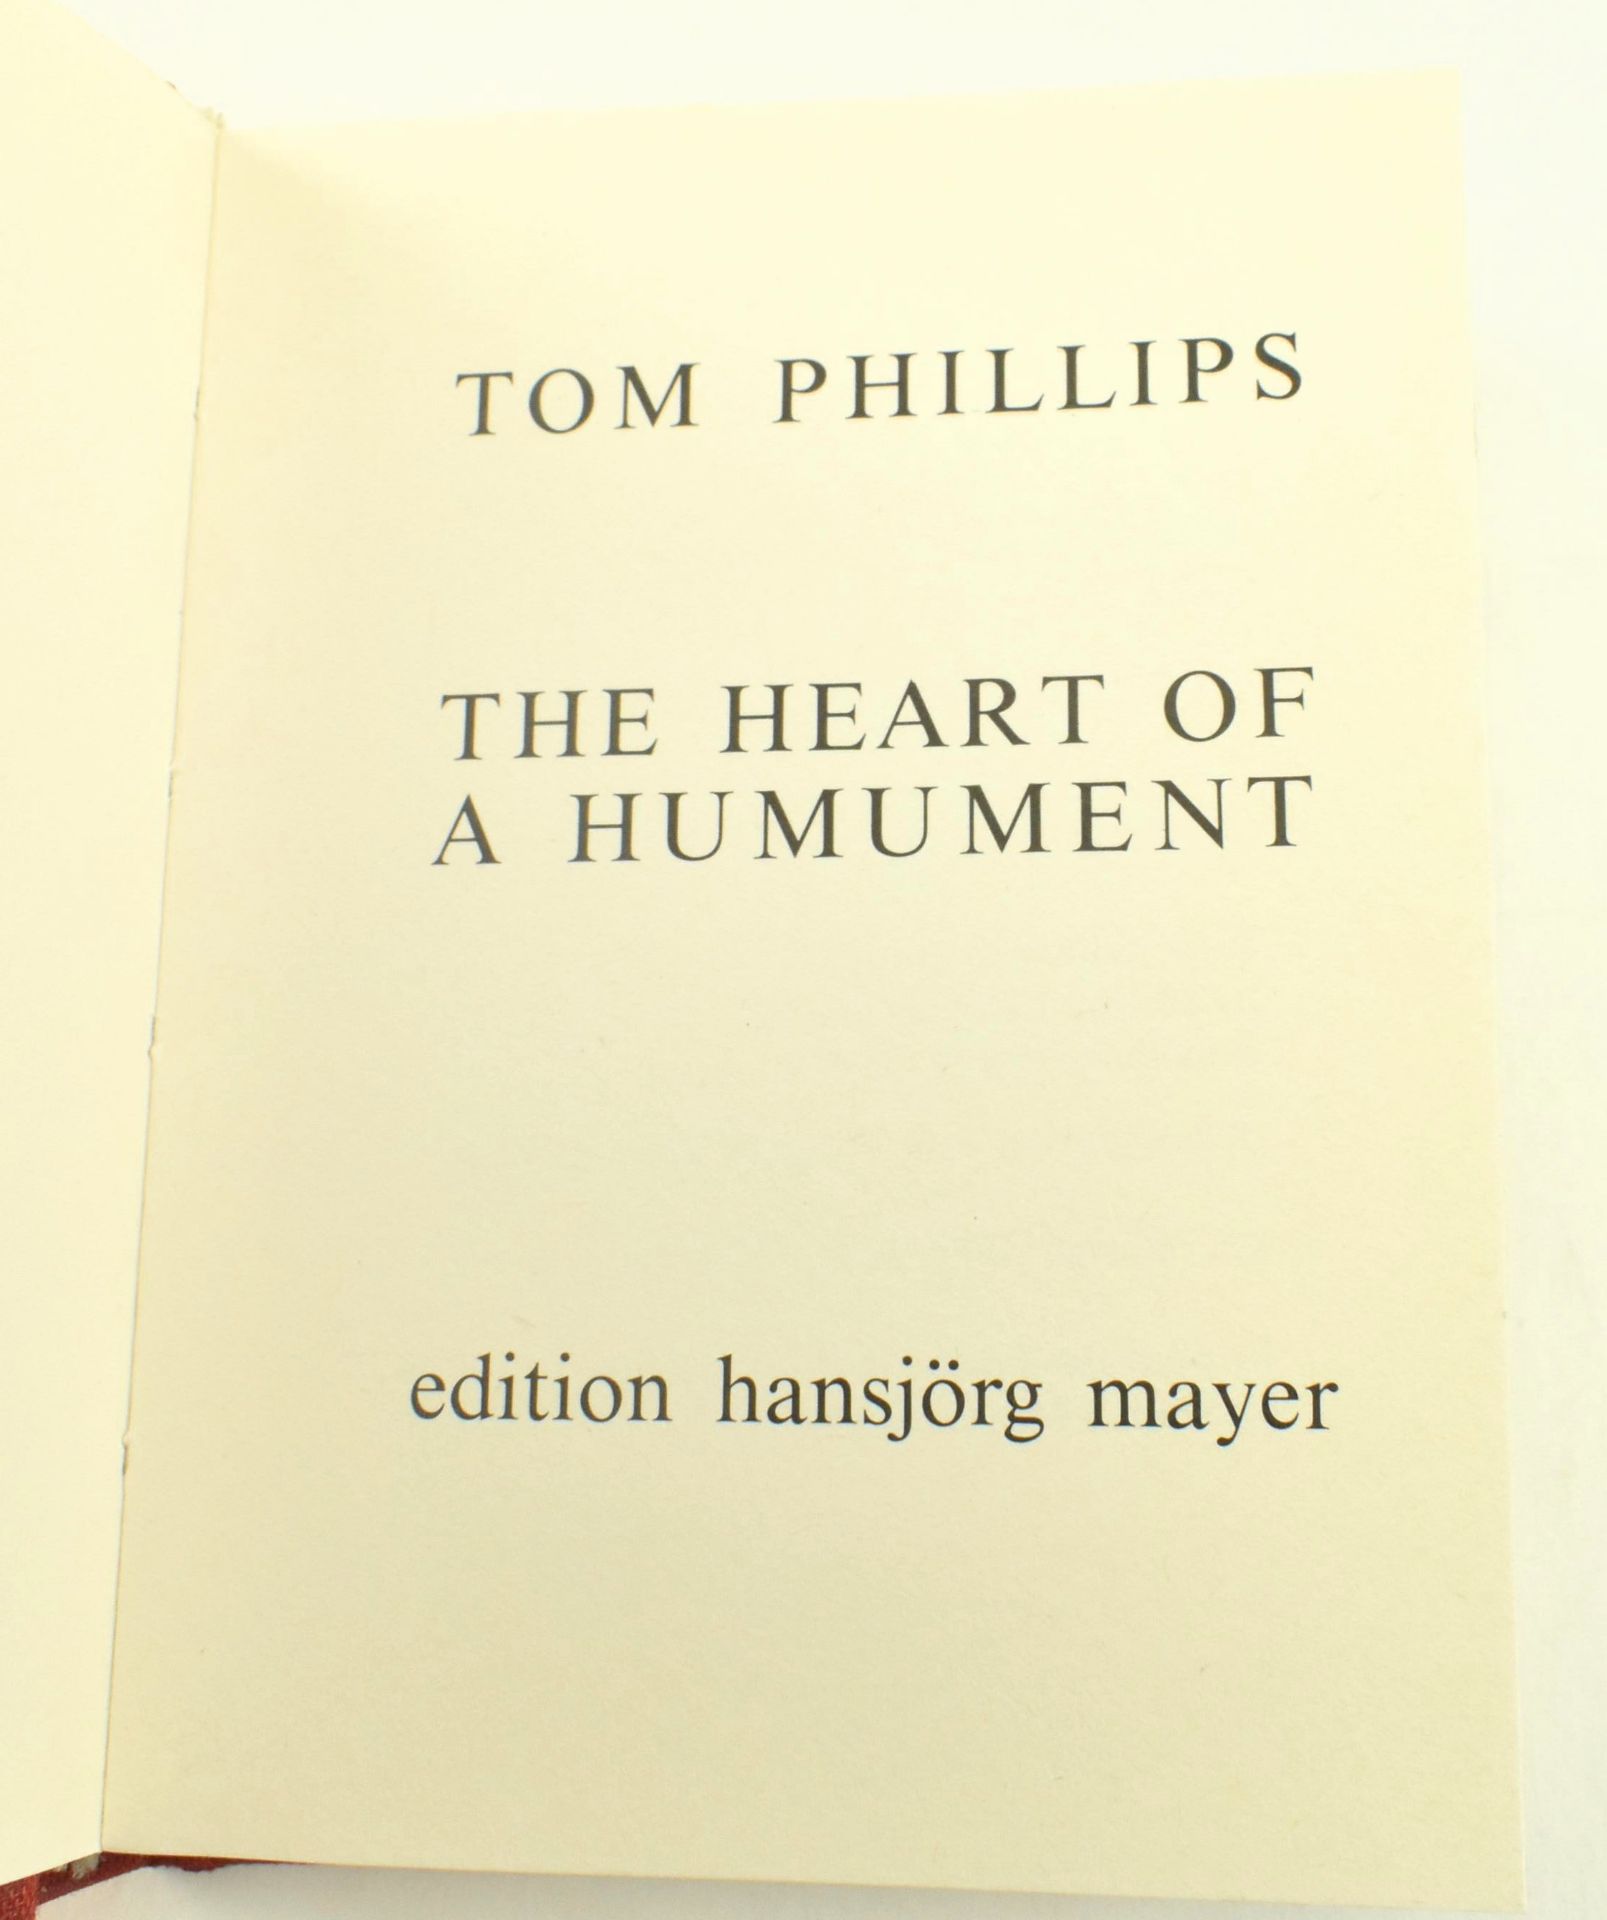 TOM PHILLIPS. TWO ILLUSTRATED WORKS, INCL. ONE SIGNED - Image 5 of 11